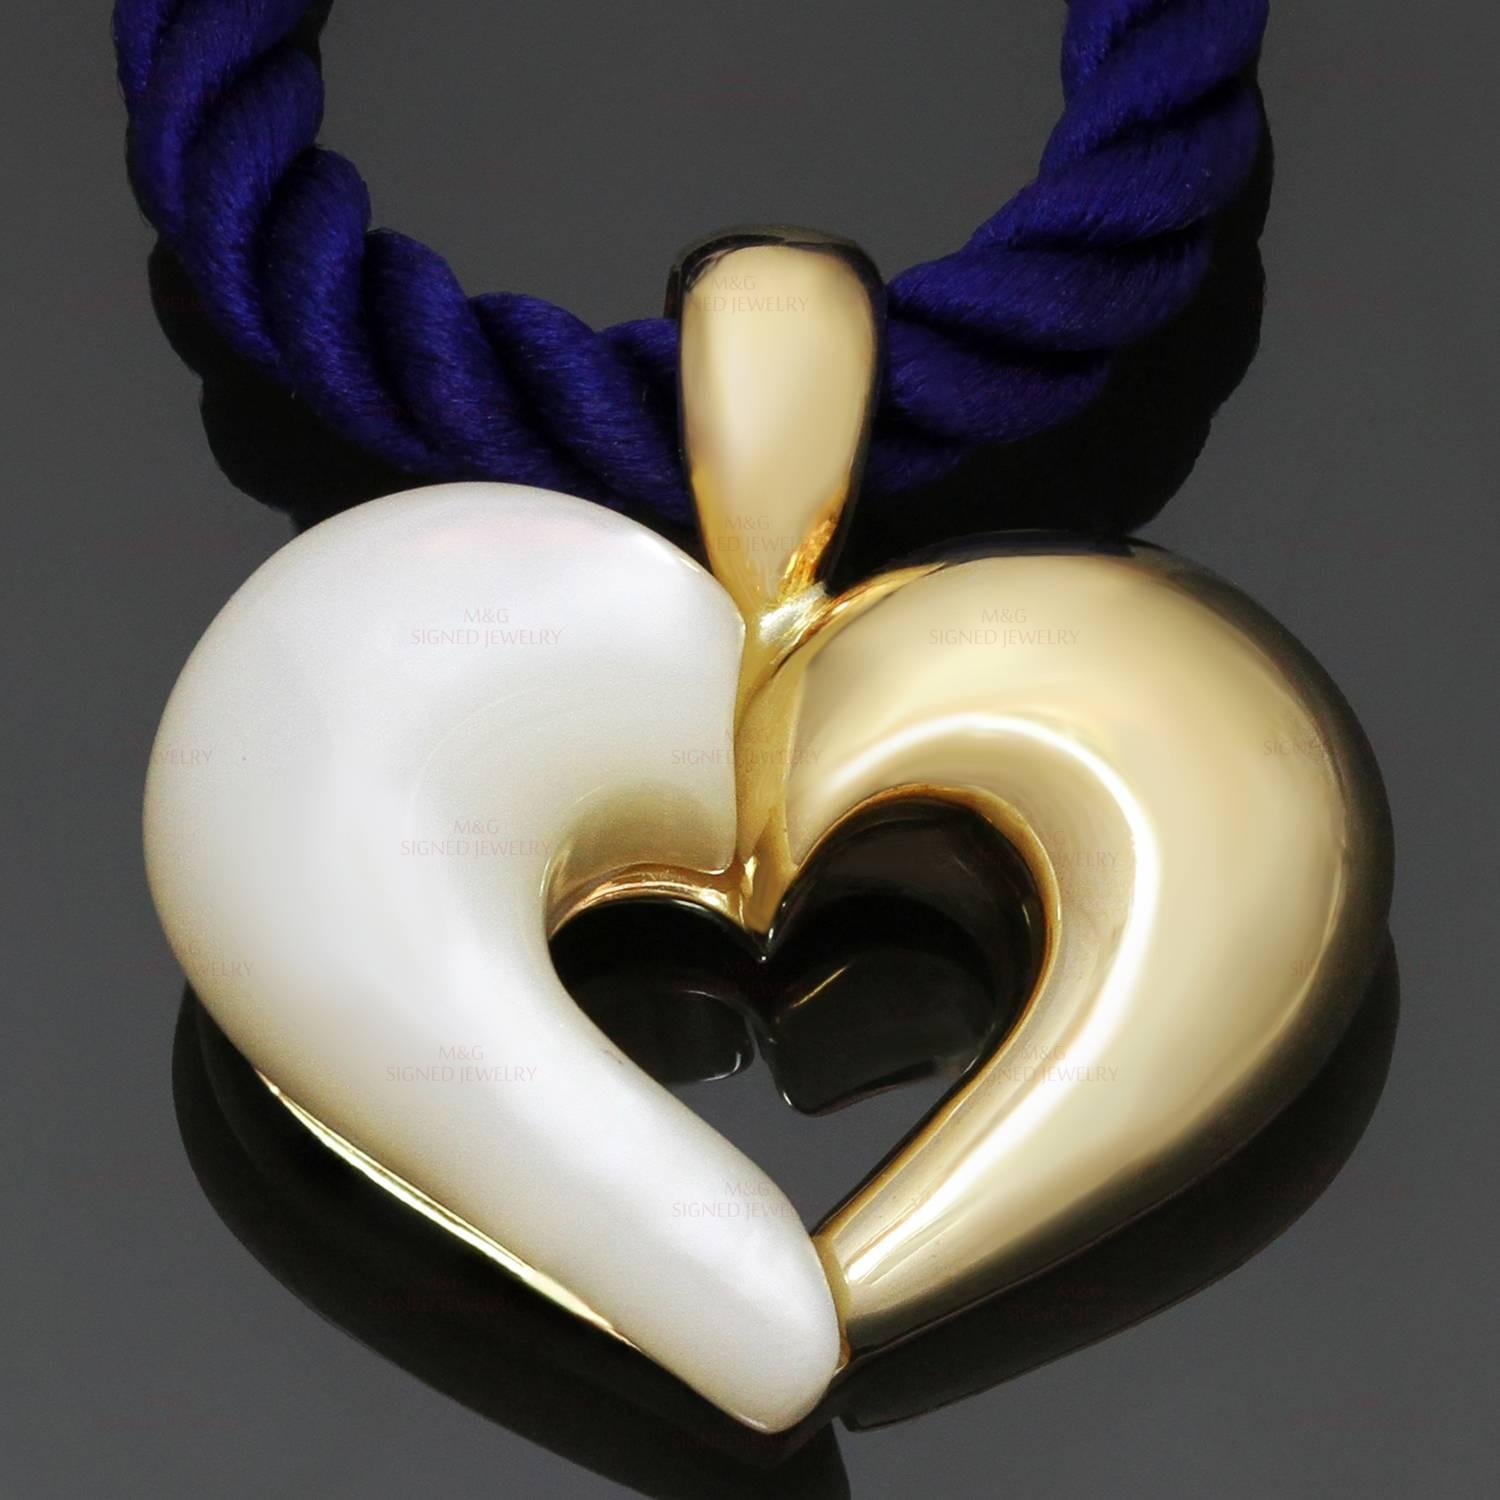 This graceful Van Cleef & Arpels heart pendant is crafted in 18k yellow gold and mother-of-pearl and completed with a blue silk cord. Made in United States circa 1990s. Measurements: 0.90